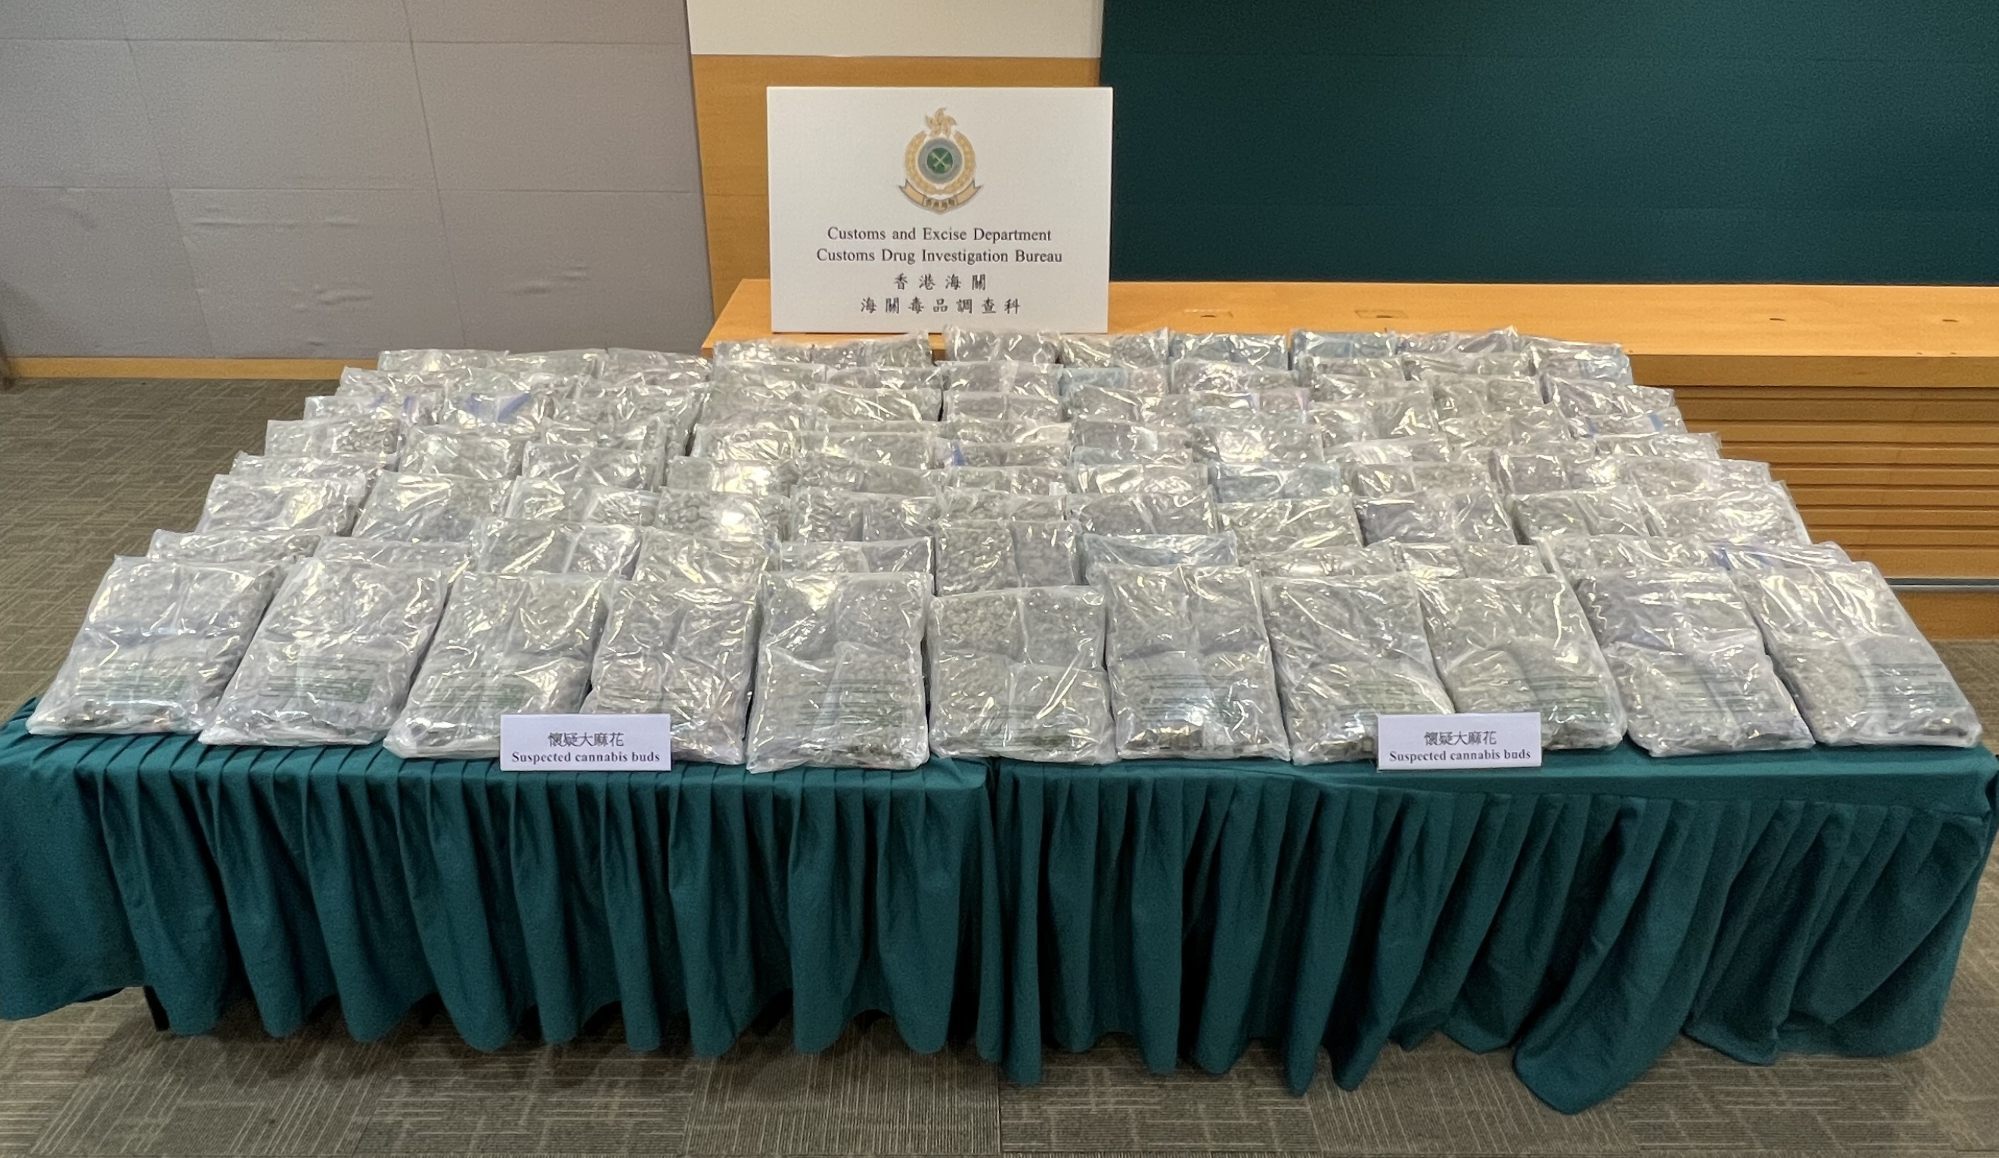 Some 110kg of cannabis was found hidden inside boxes of instant oats. Photo: Handout